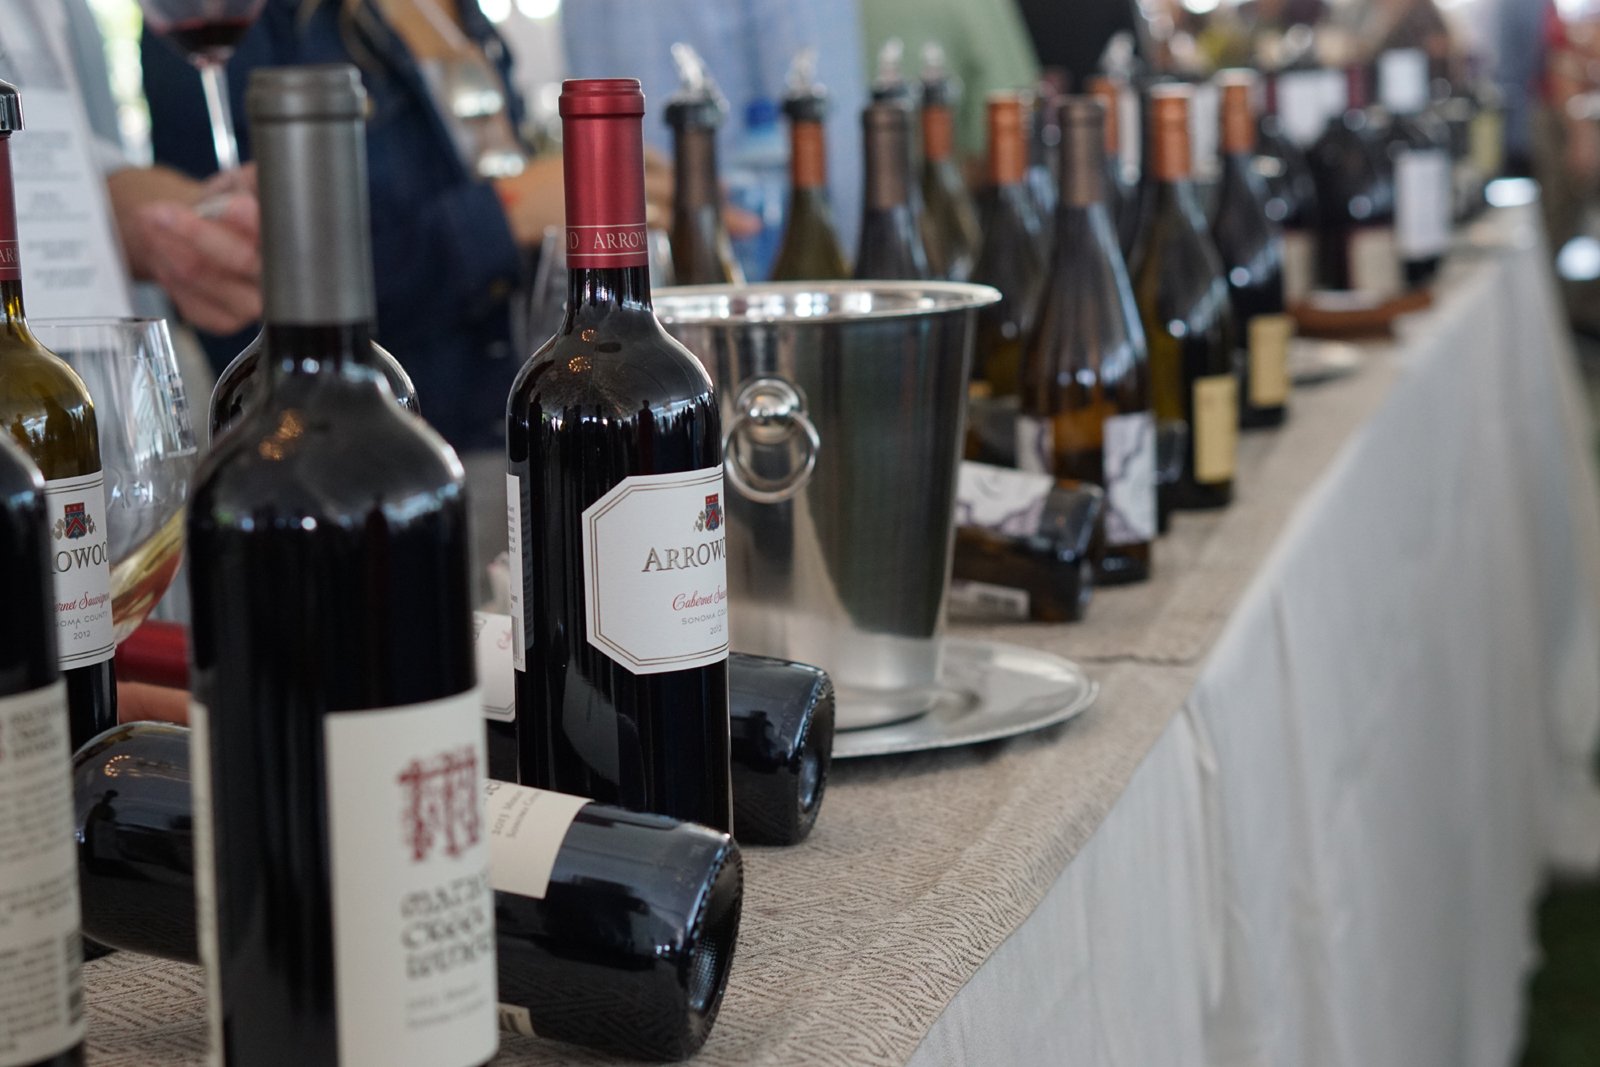 The Newport Beach Wine & Food Festival is Finally Here!